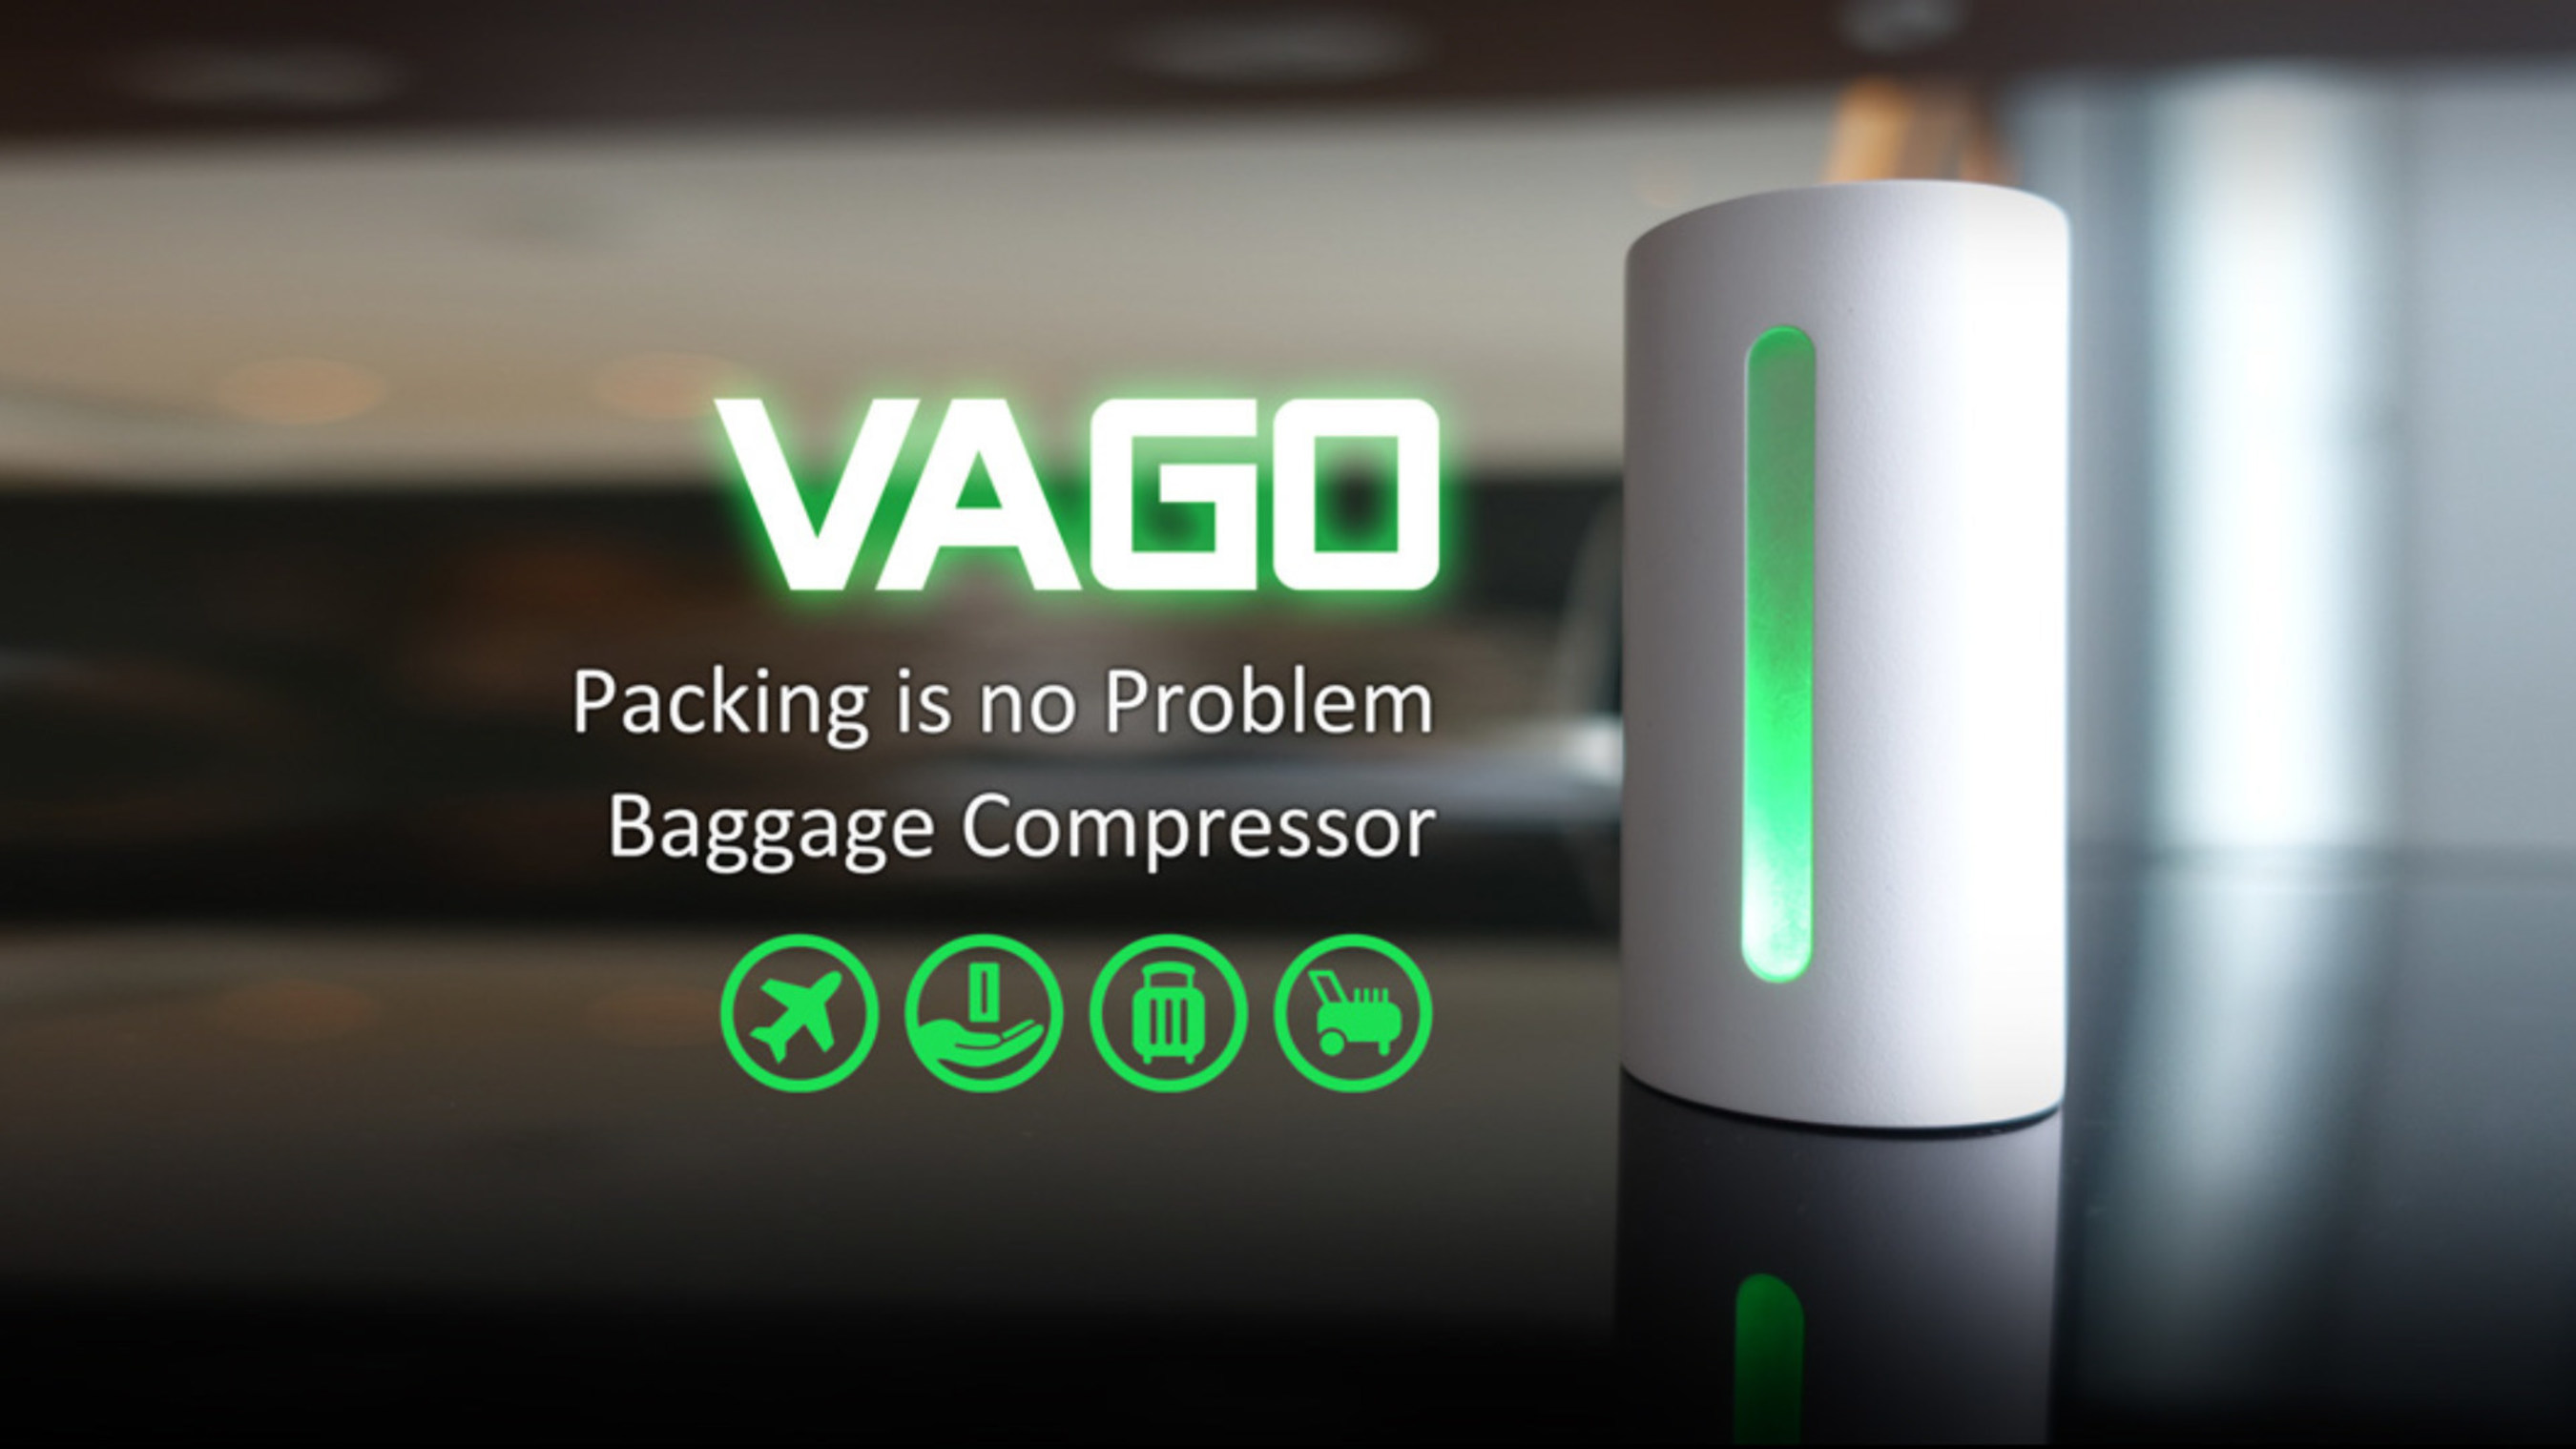 VAGO is a new travel tool